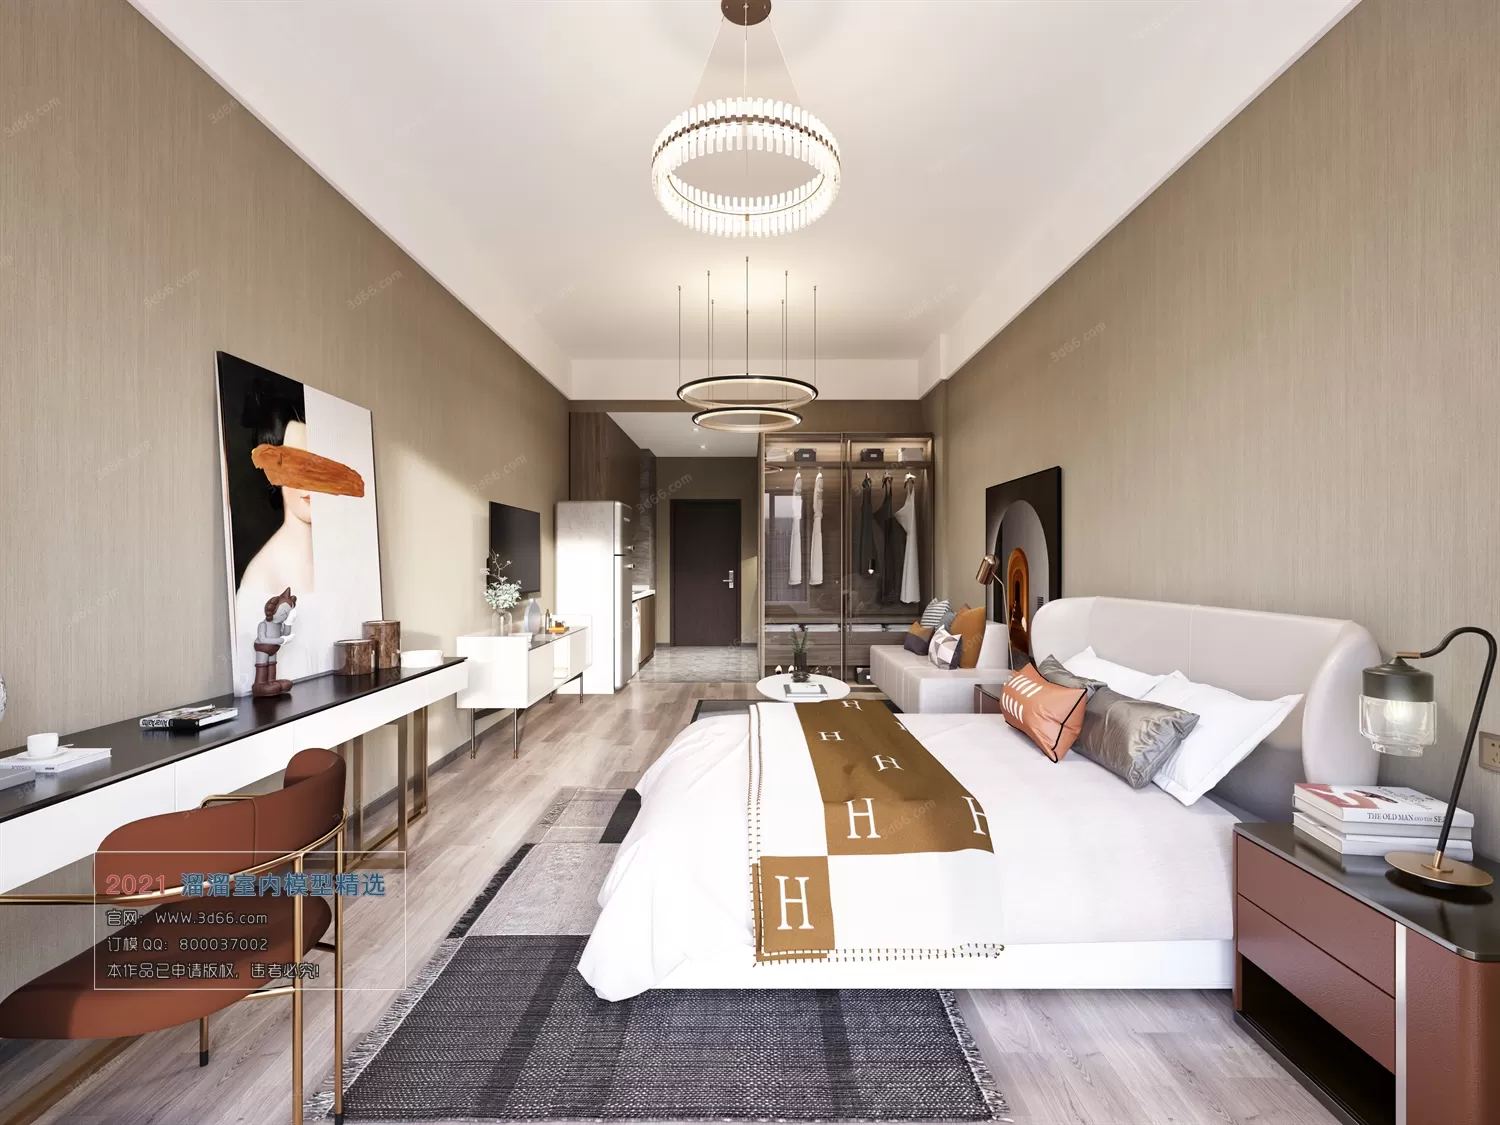 HOTEL SUITE – A001-Modern style-Vray model